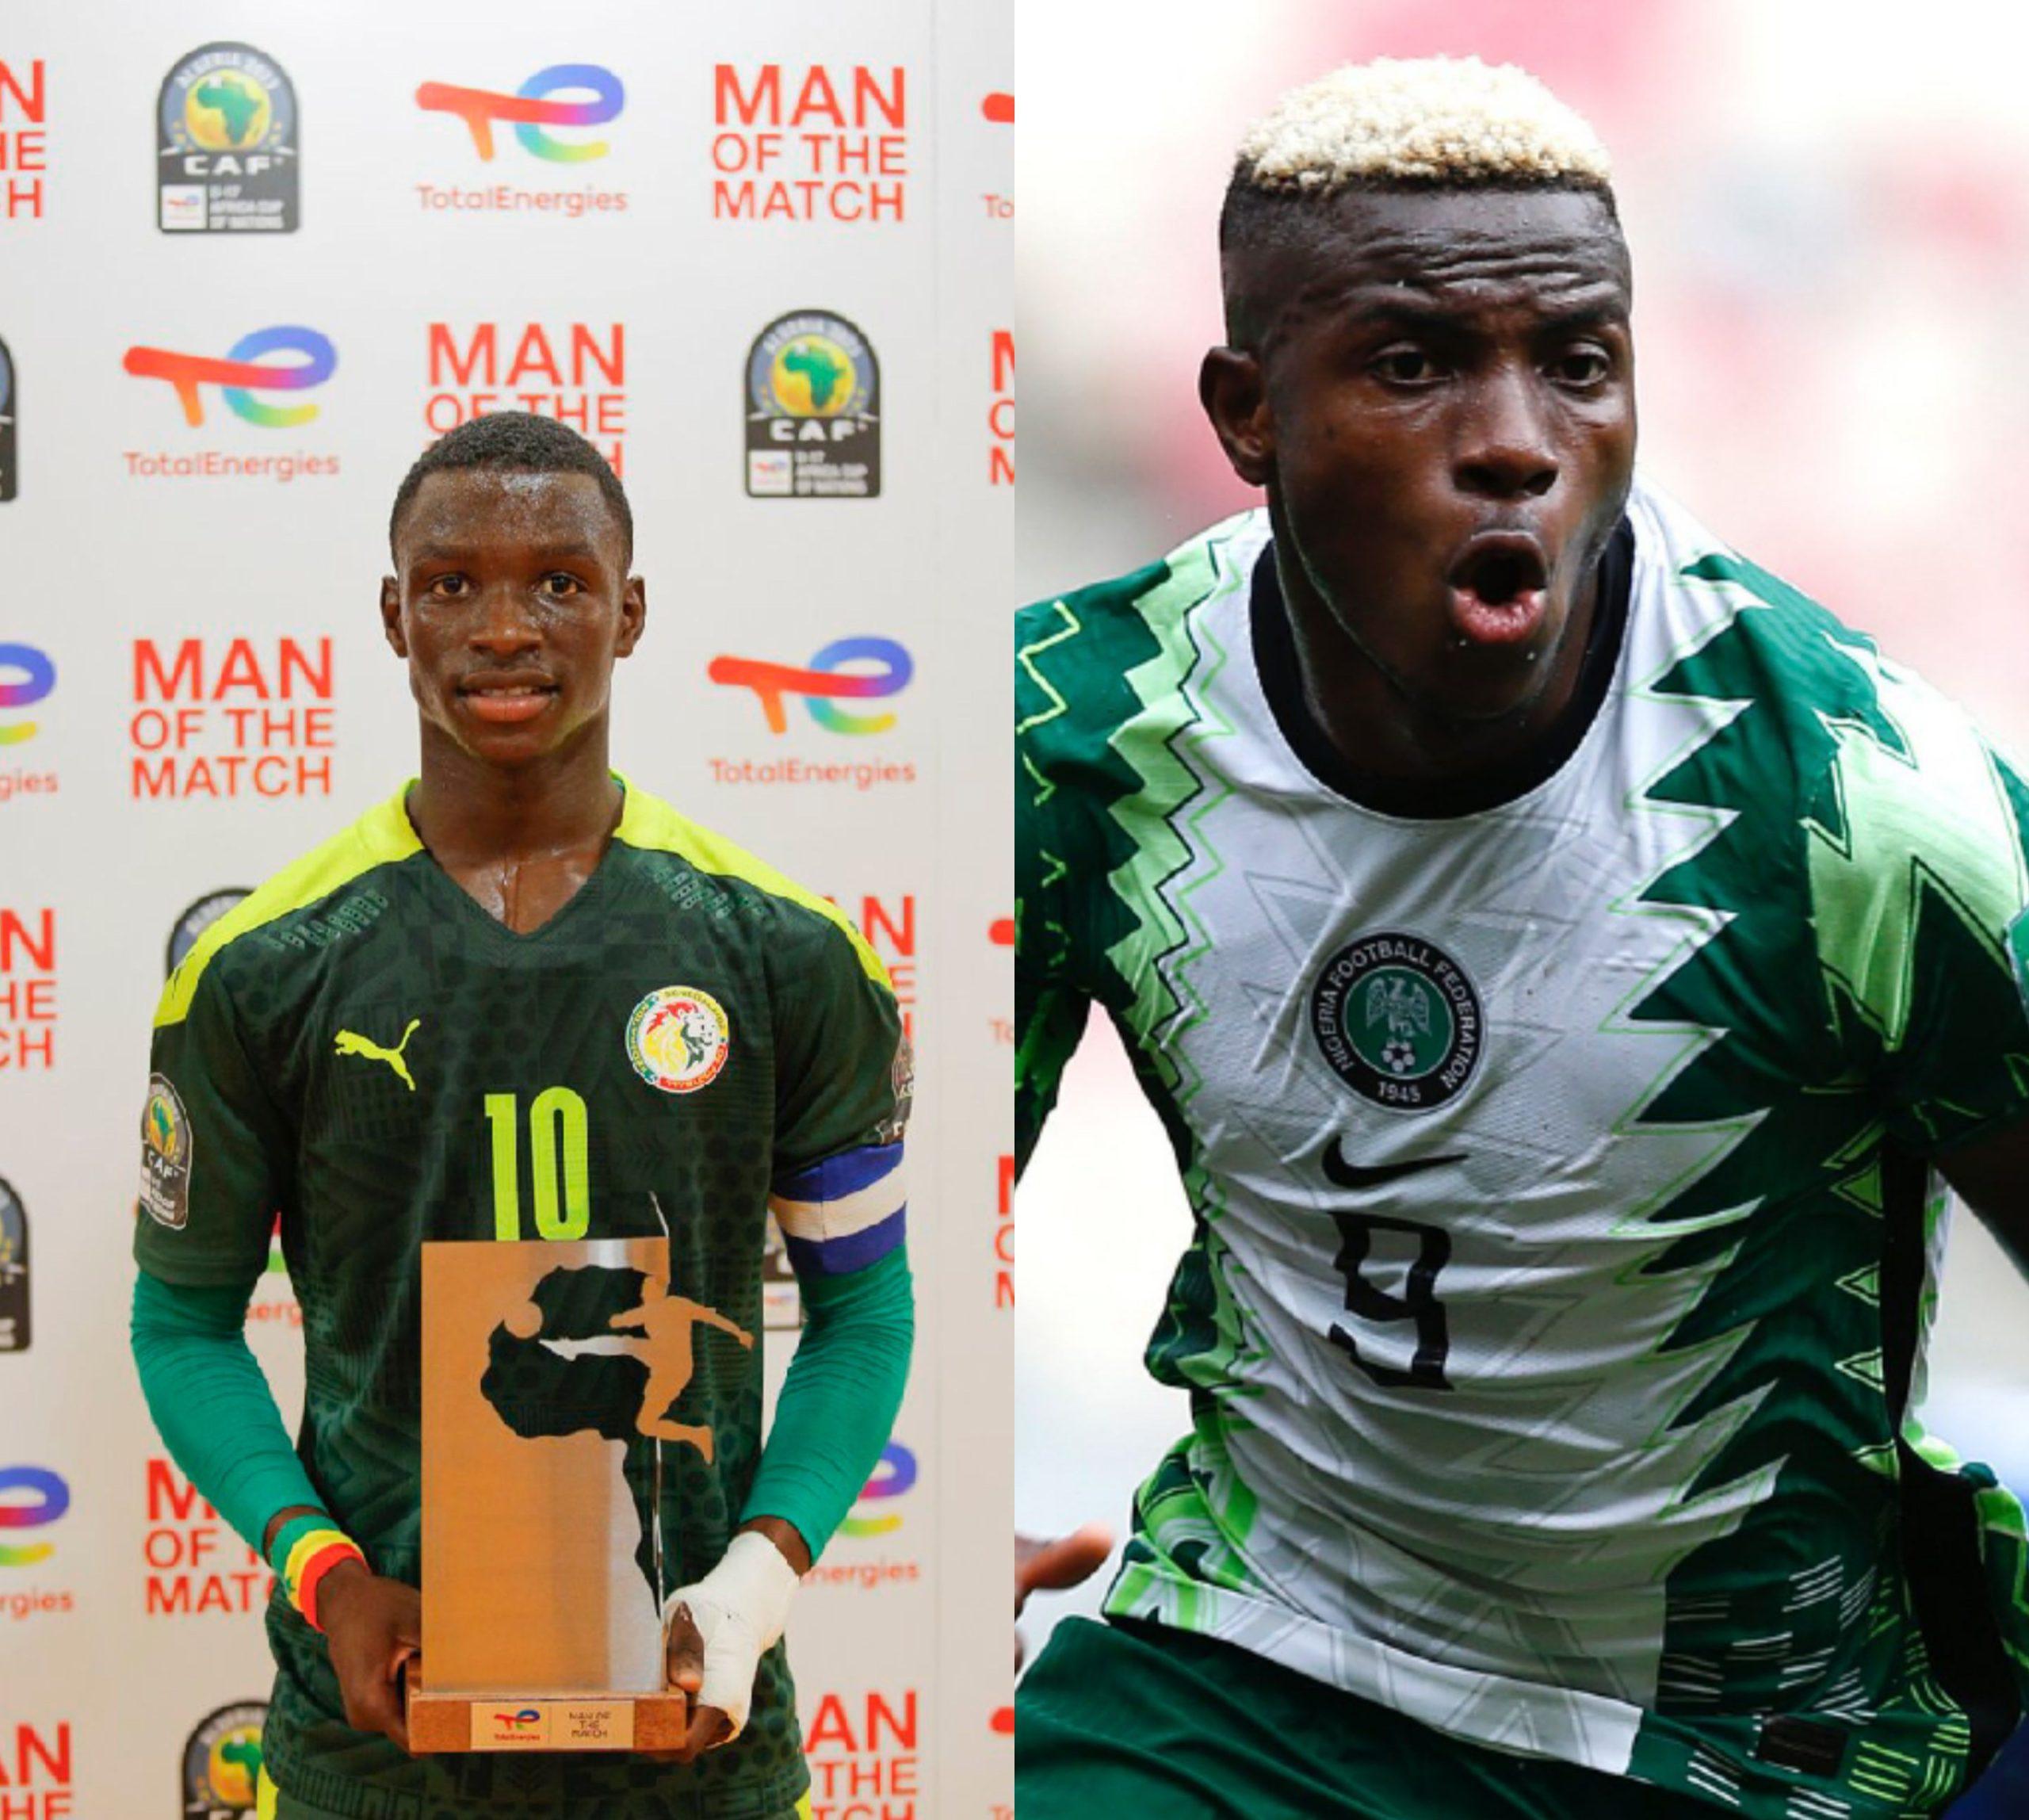 U-17 AFCON: Senegalese top scorer snubs Liverpool hero Mane, aims to be like Napoli star Osimhen